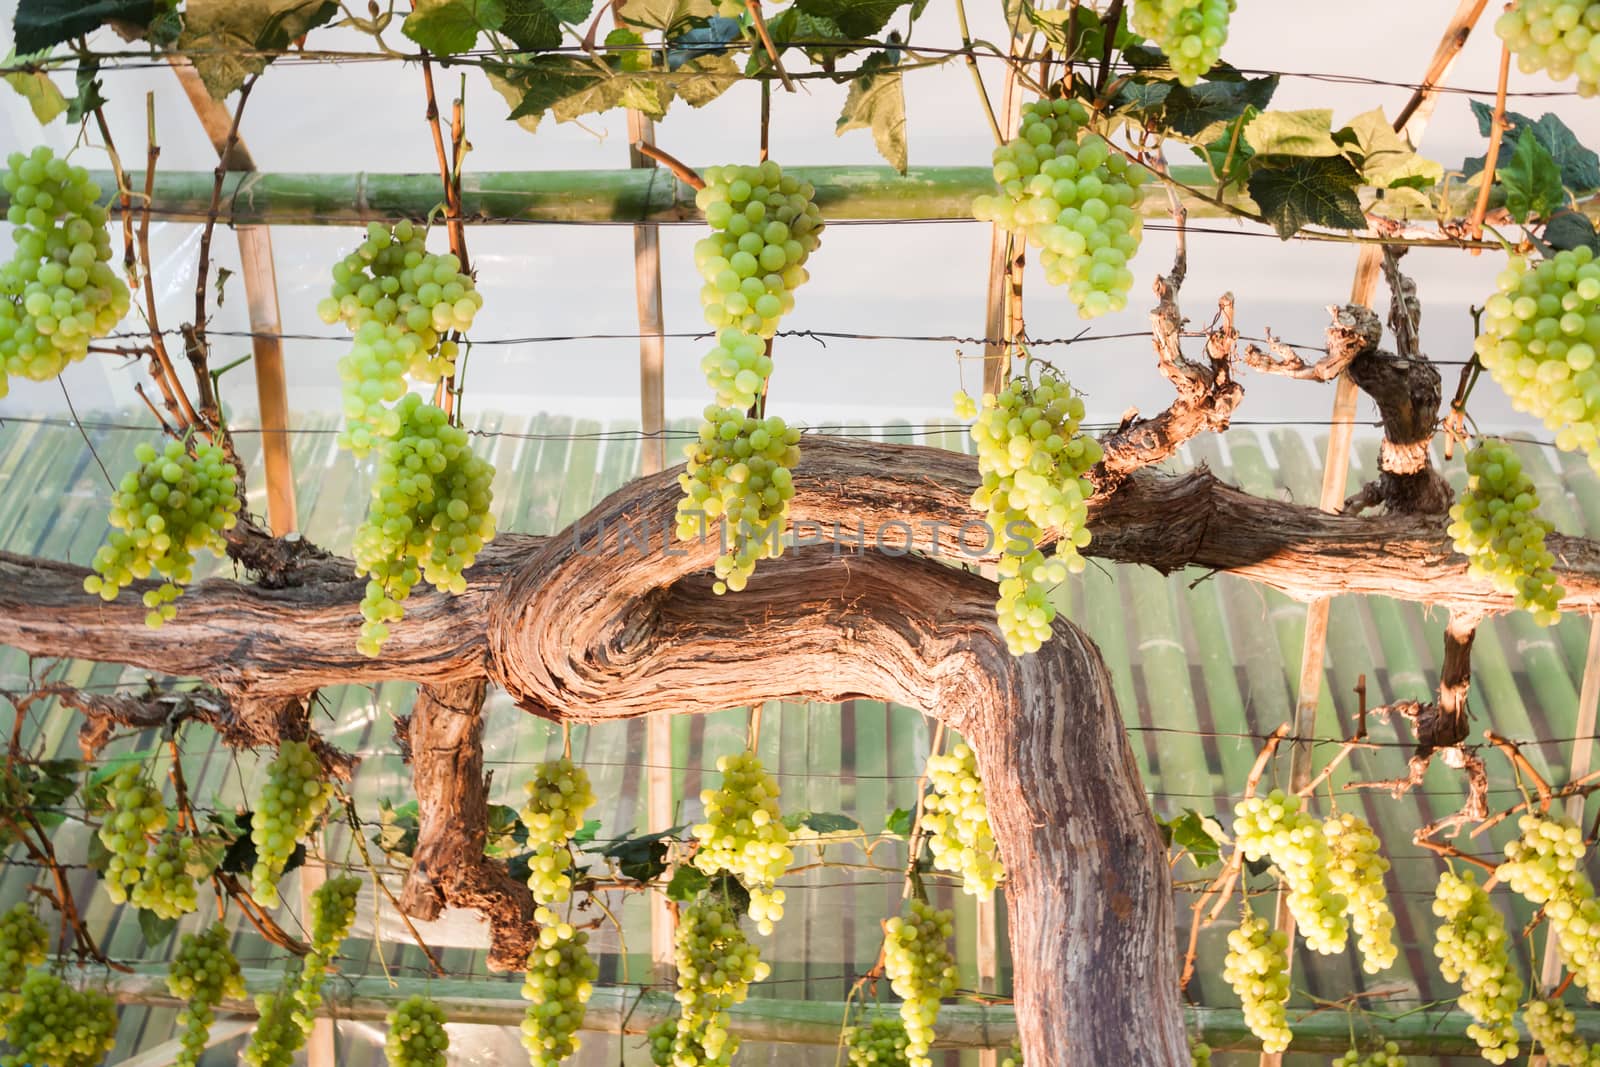 Bunches of grapes hang from a vine, stock photo